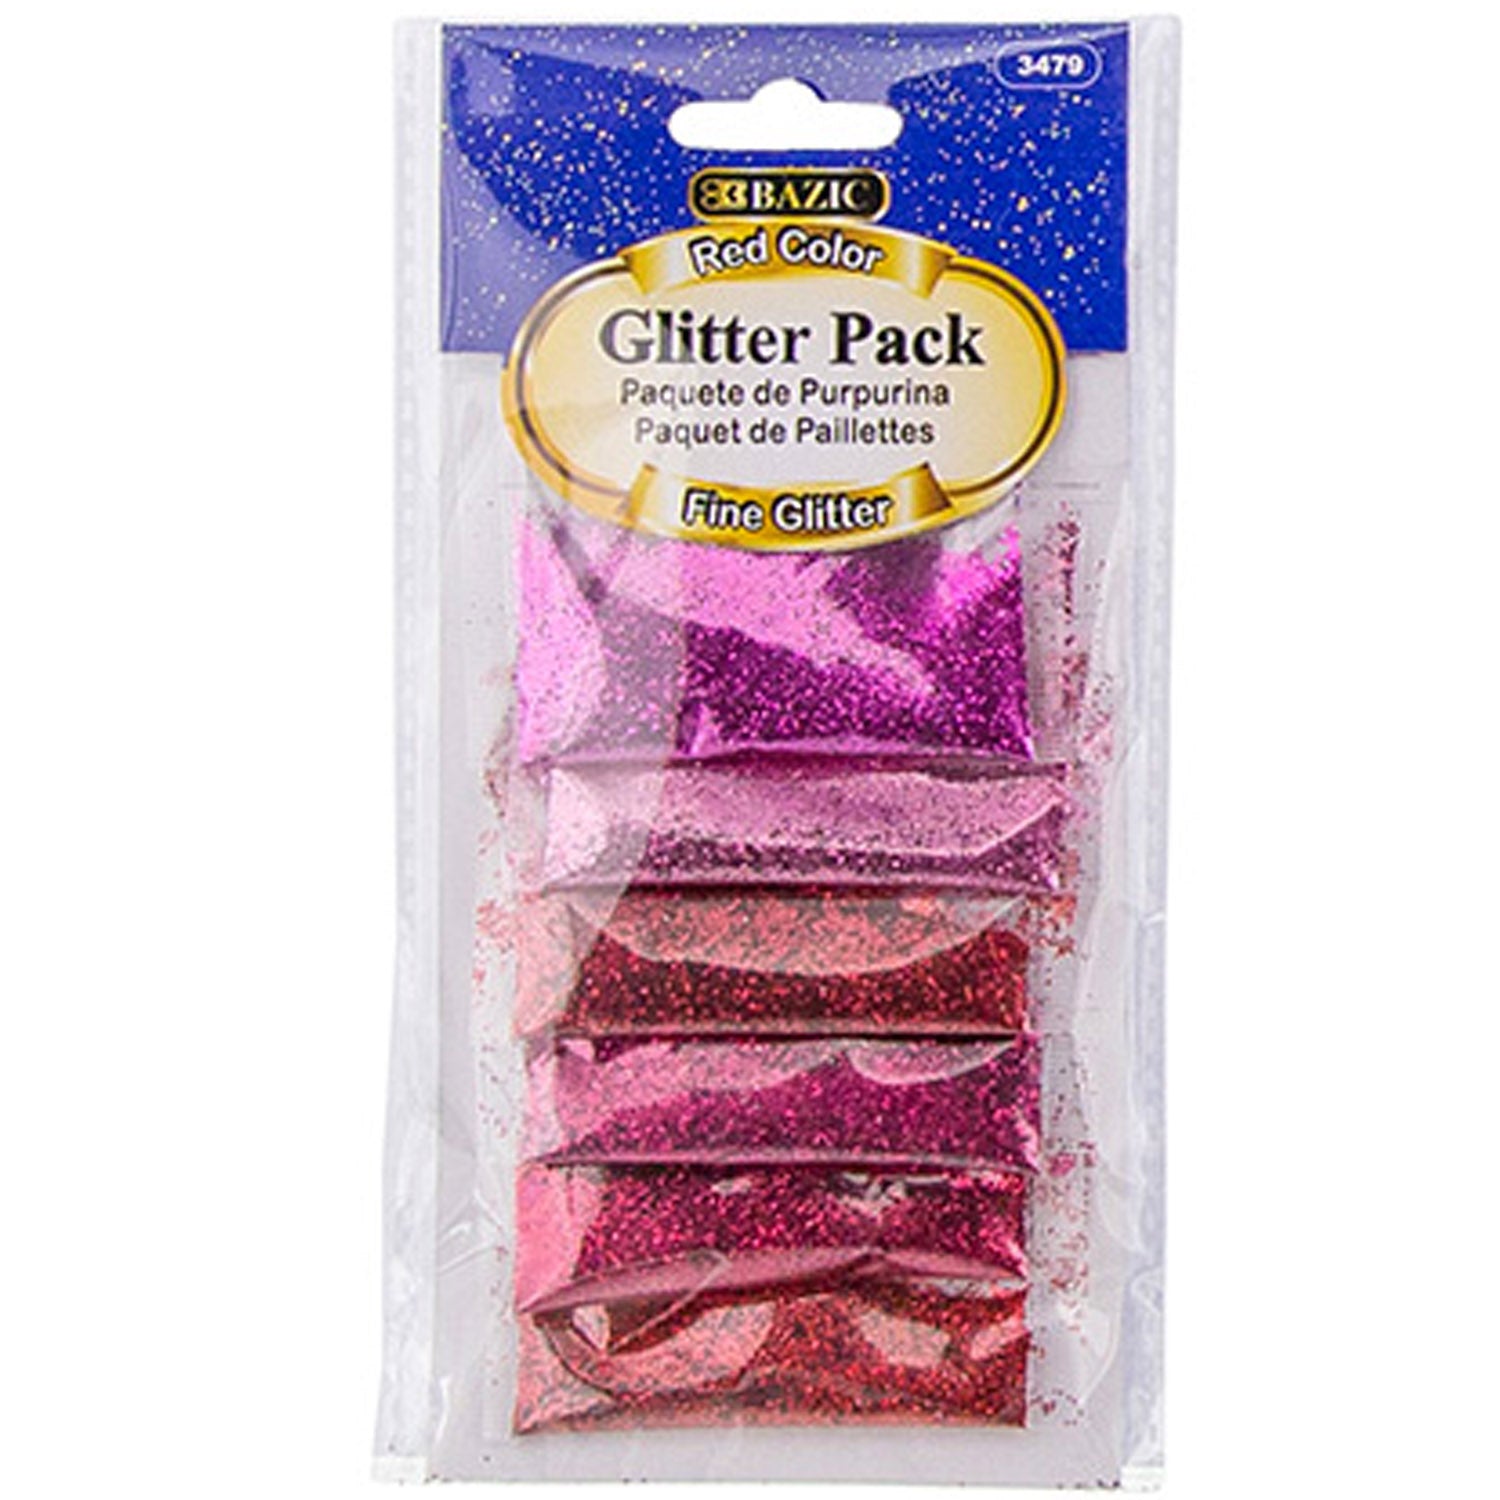 Red Color Glitter Pack for your Art | 0.07 oz (2g)